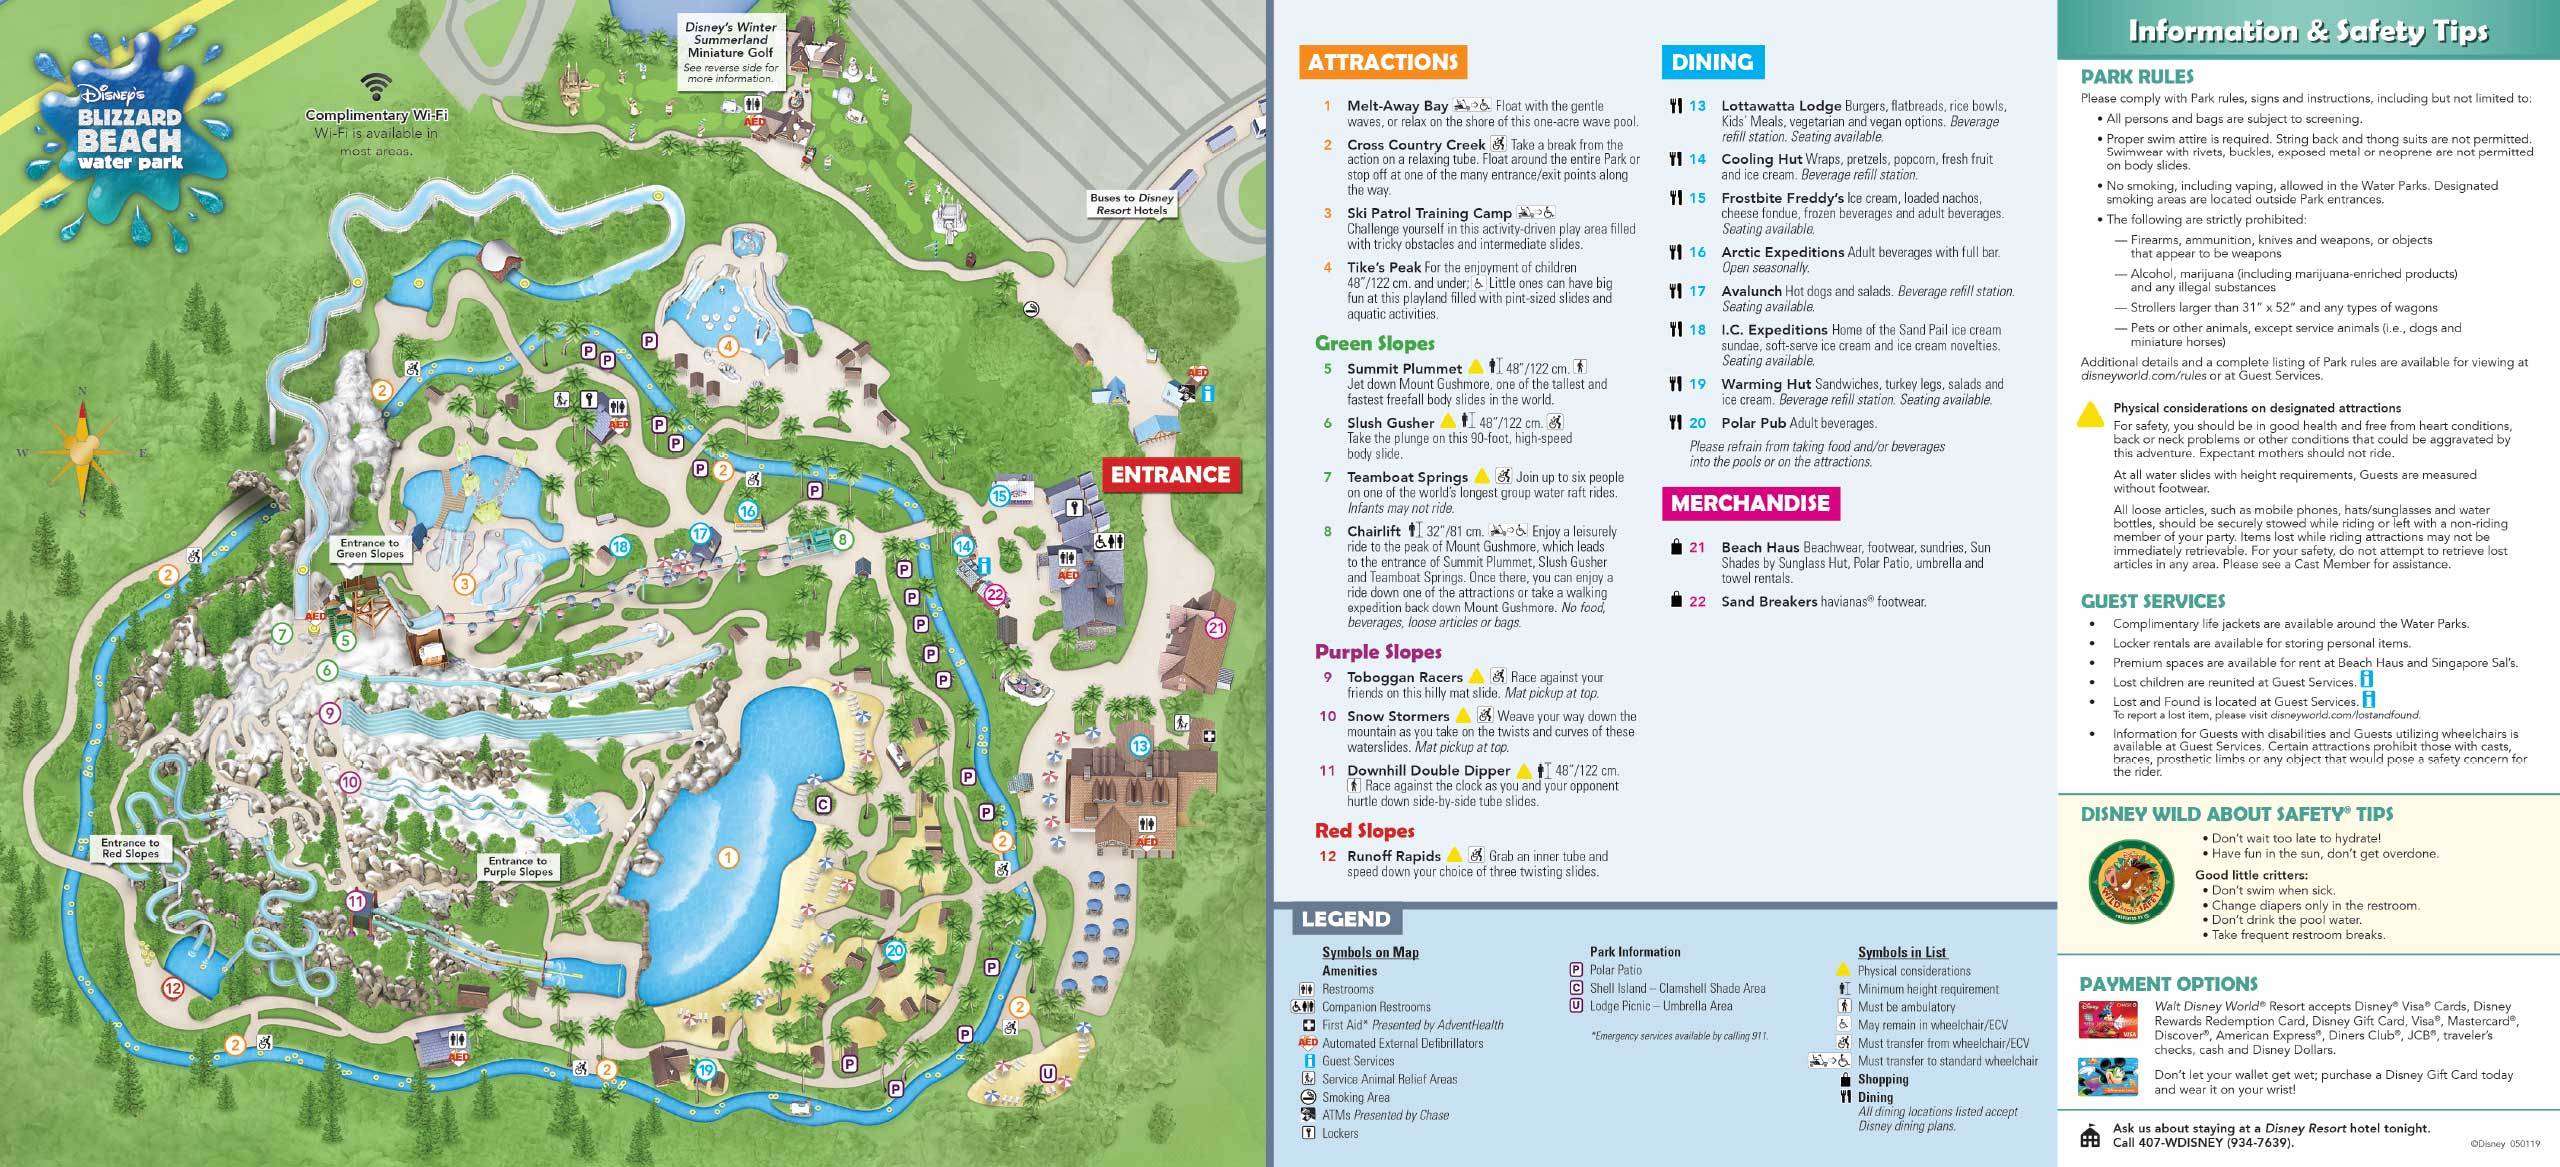 Disney's Water Parks Guide Map July 2020 - Back